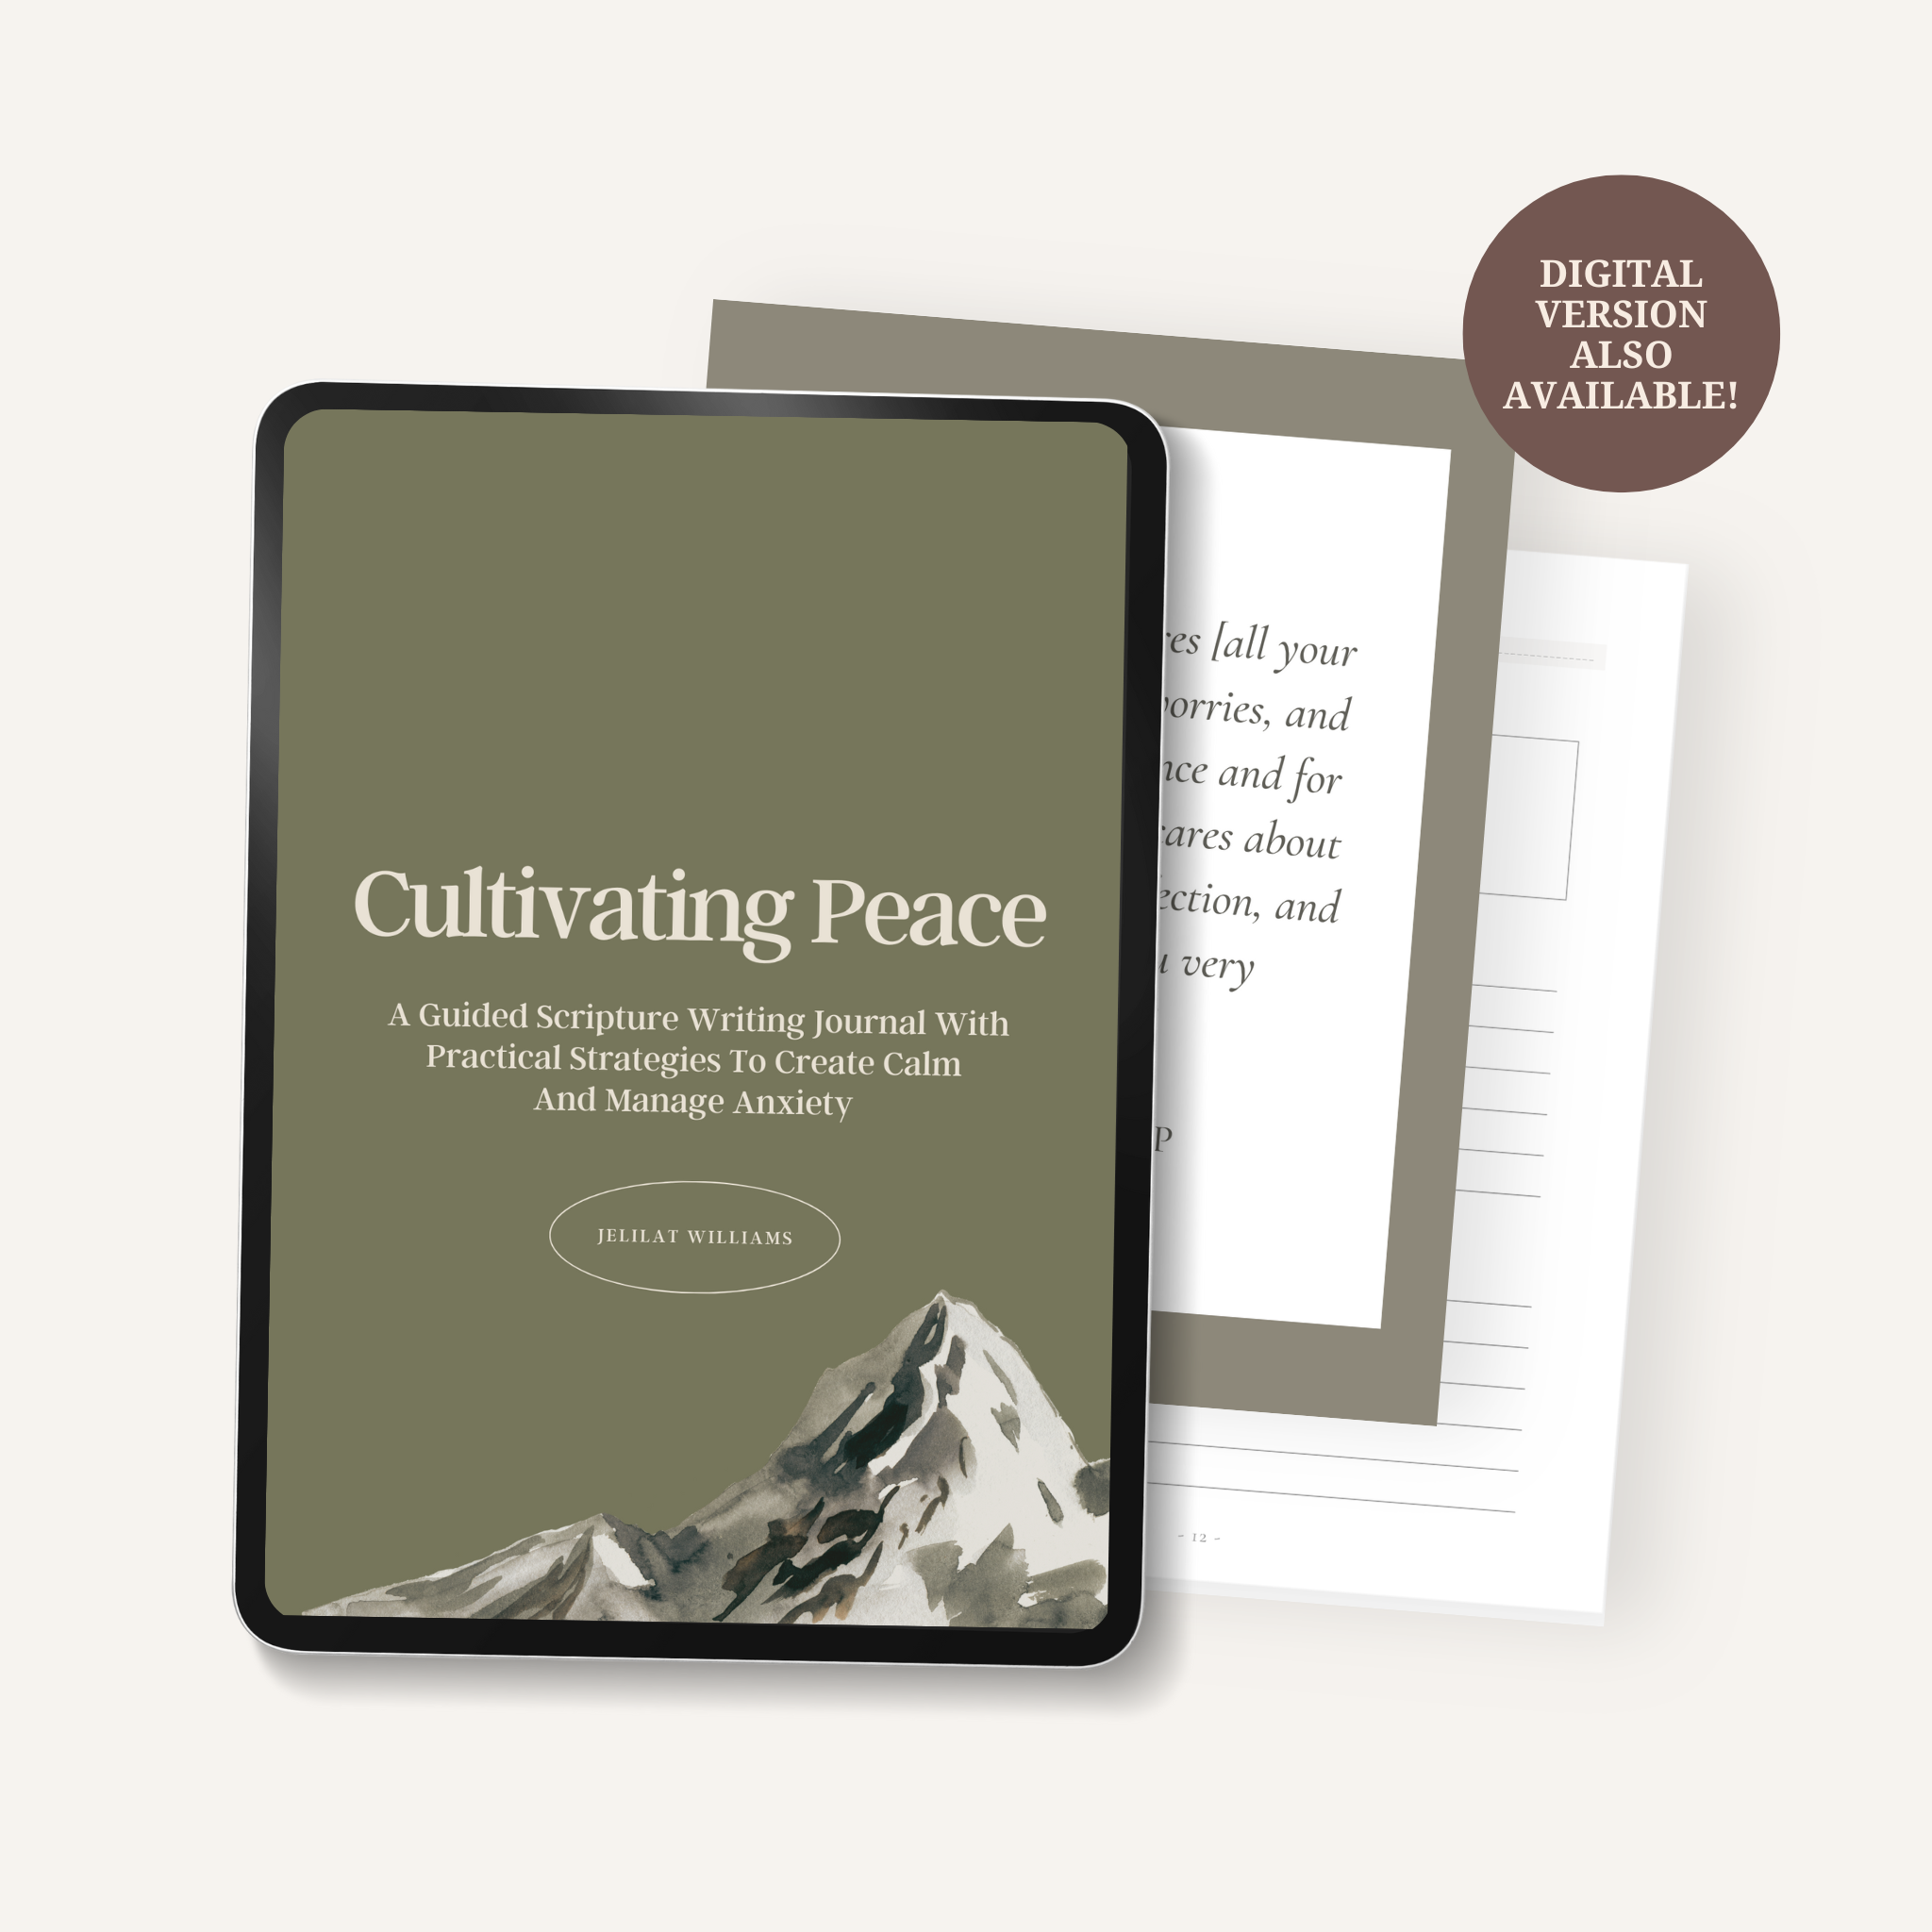 Cultivating Peace: A Guided Scripture Writing Journal With Practical Strategies To Create Calm And Manage Anxiety